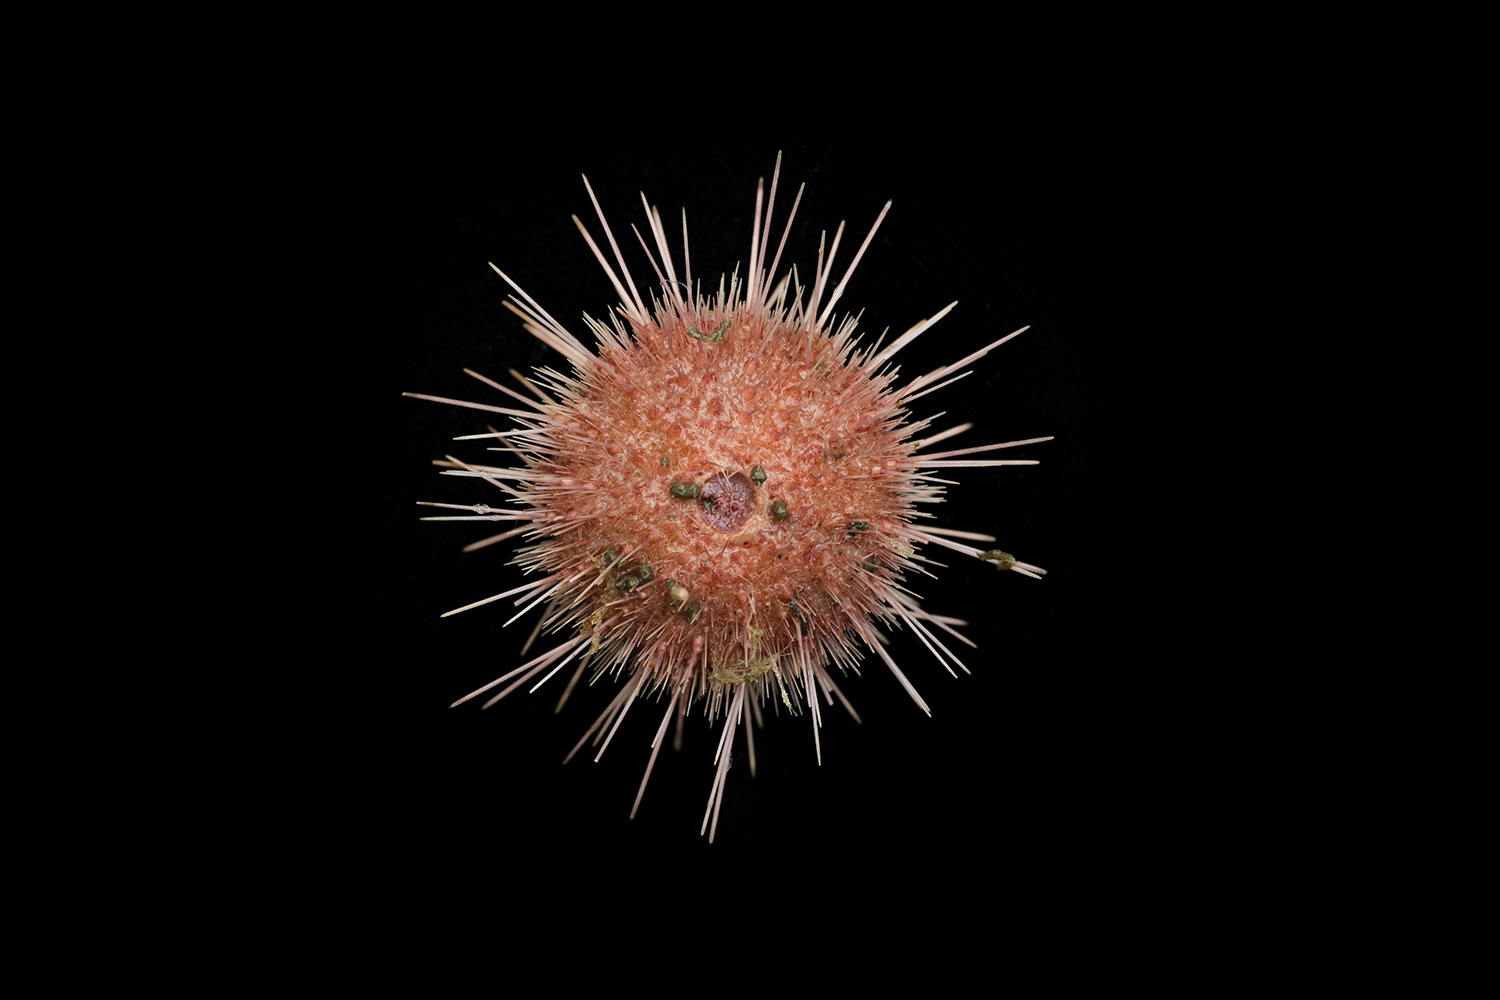 A sample of the Antarctic sea urchin, Sterechinus, found at approximately 300 meters depth at Kinnes Cove in the Antarctic Sound.